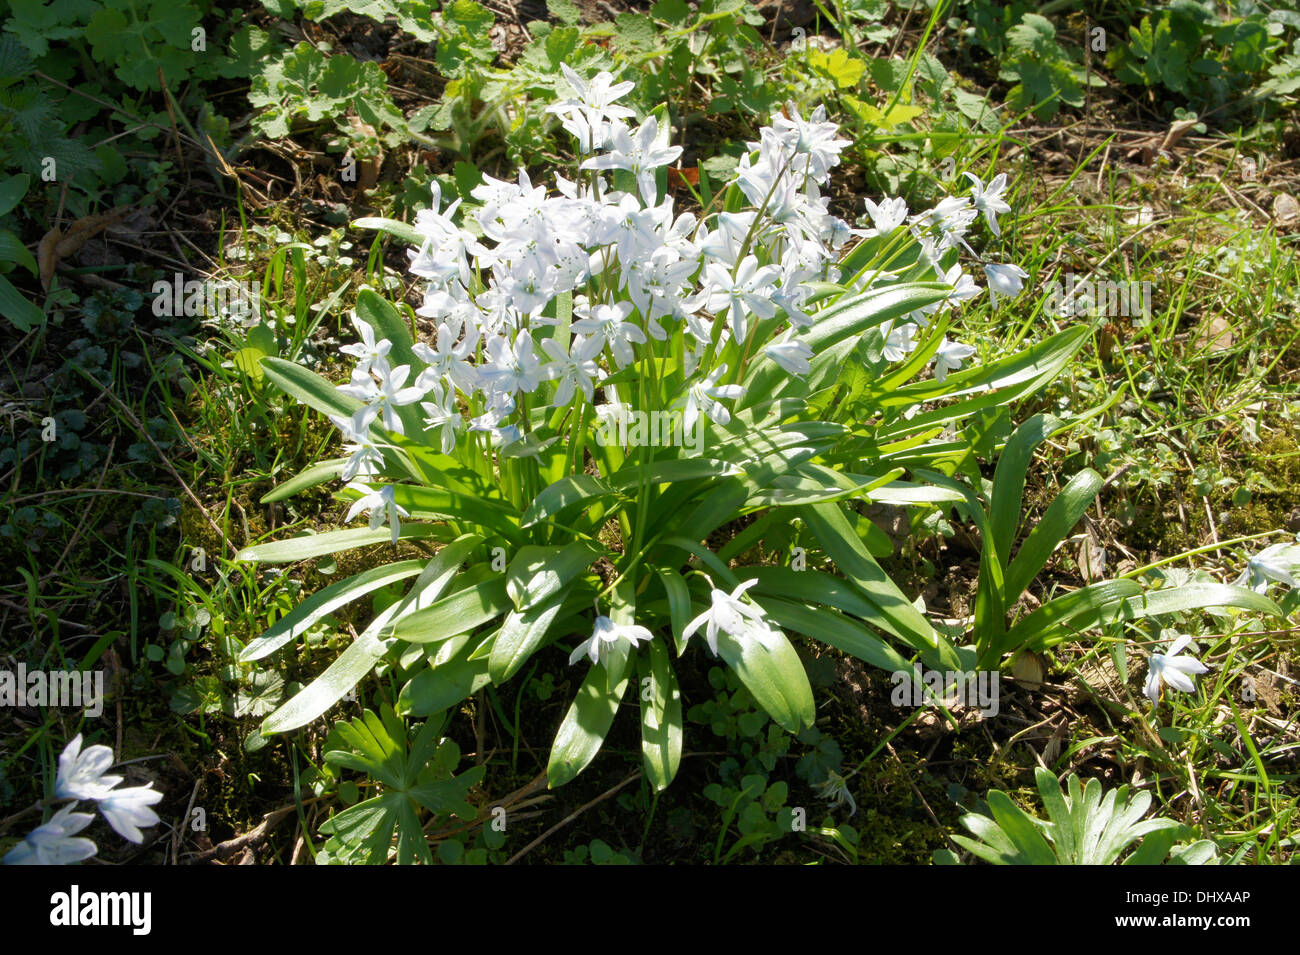 Striped squill Stock Photo